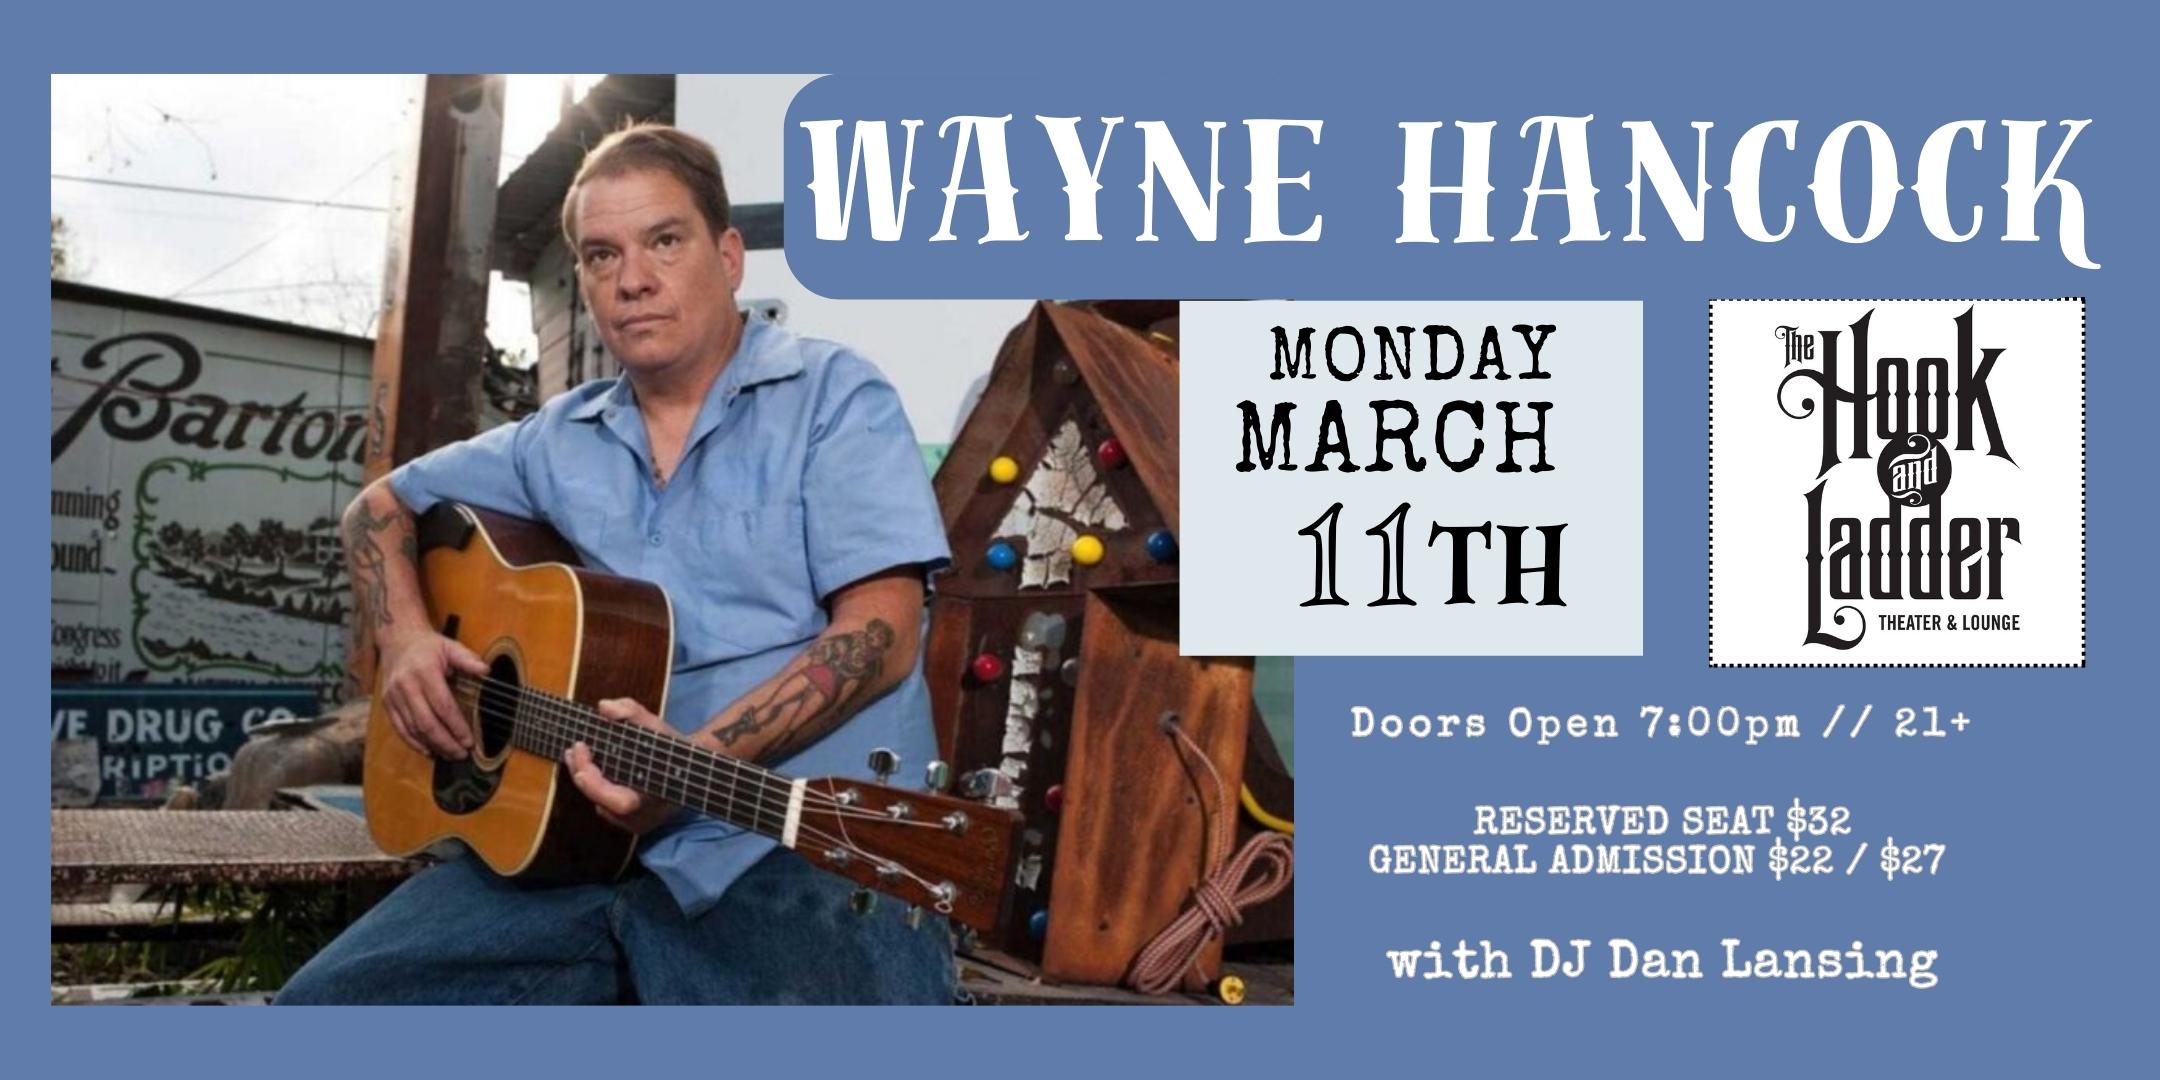 An Evening with Wayne Hancock + DJ Dan Lansing spinning vinyl Monday, March 11 The Hook and Ladder Theater Doors 7:00pm :: Music 7:30pm :: 21+ RESERVED SEAT $32 GENERAL ADMISSION $22 ADV / $27 DOS NO REFUNDS Tickets On-Sale NOW